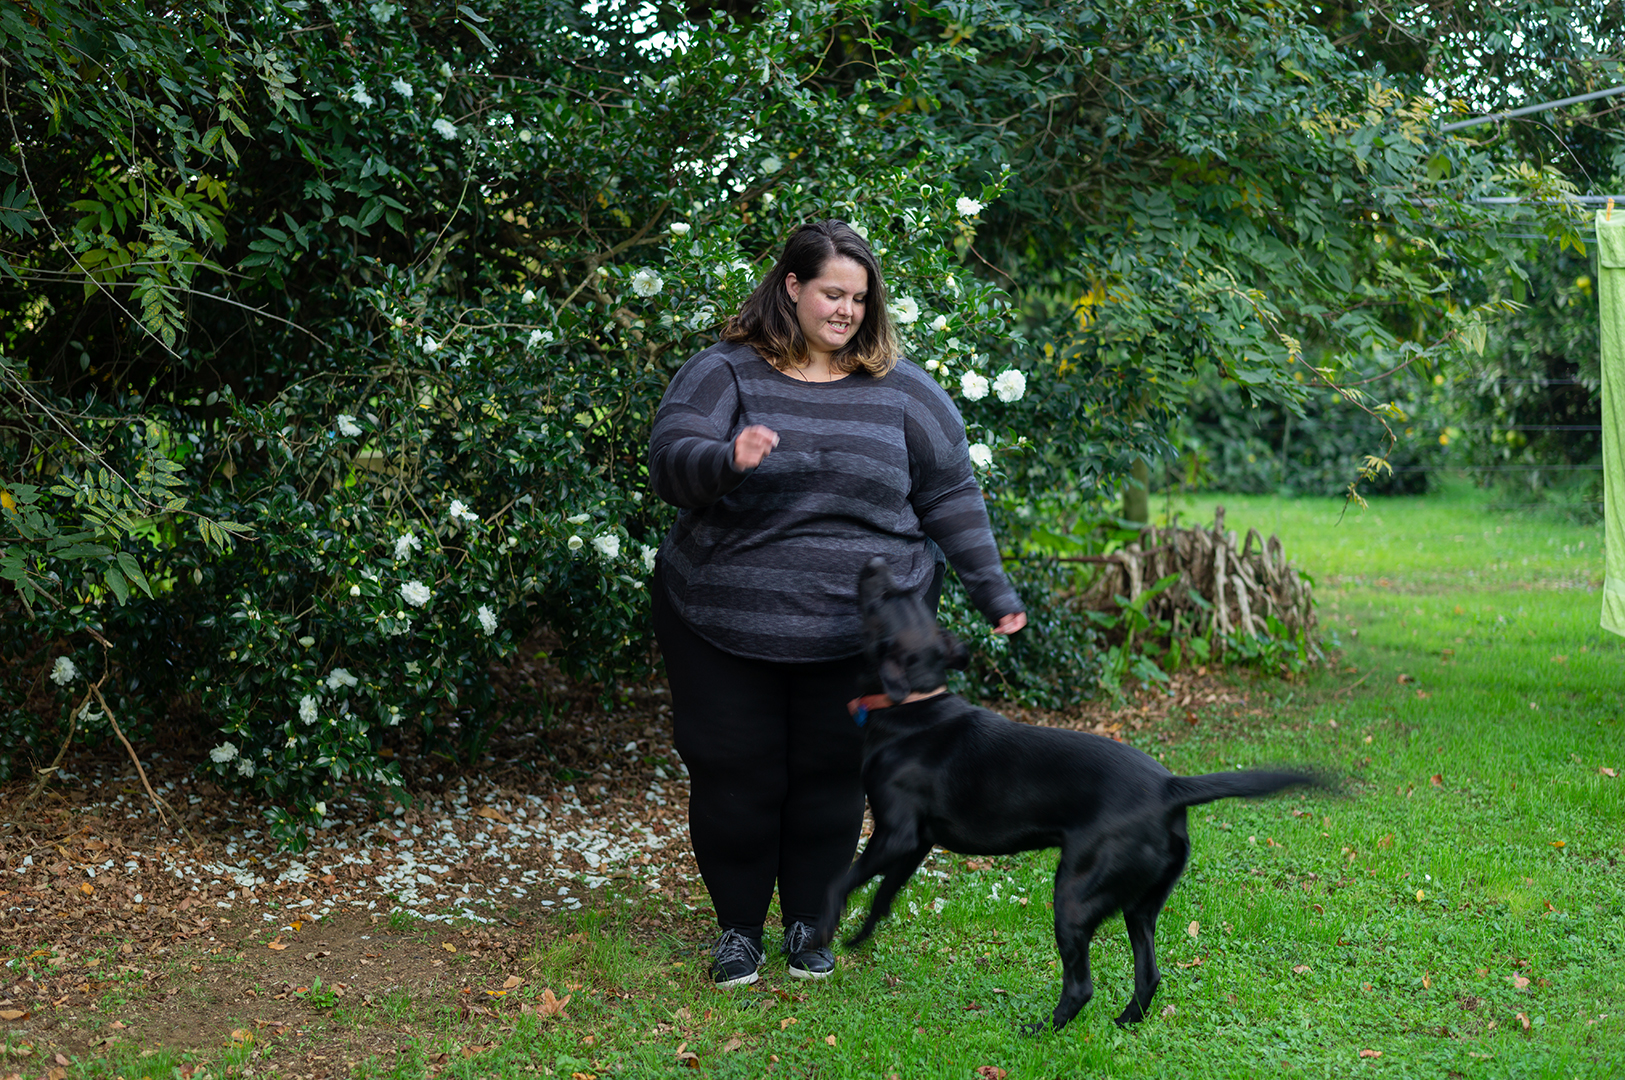 New Zealand plus size blogger Meagan Kerr is standing in a lush green garden in front of a camellia bush with a black Labrador Retriever. She wears 17 Sundays Slub Knit Top in XL, Snag Tights Leggings in H and Ziera Shoes DANNI sneakers in 8